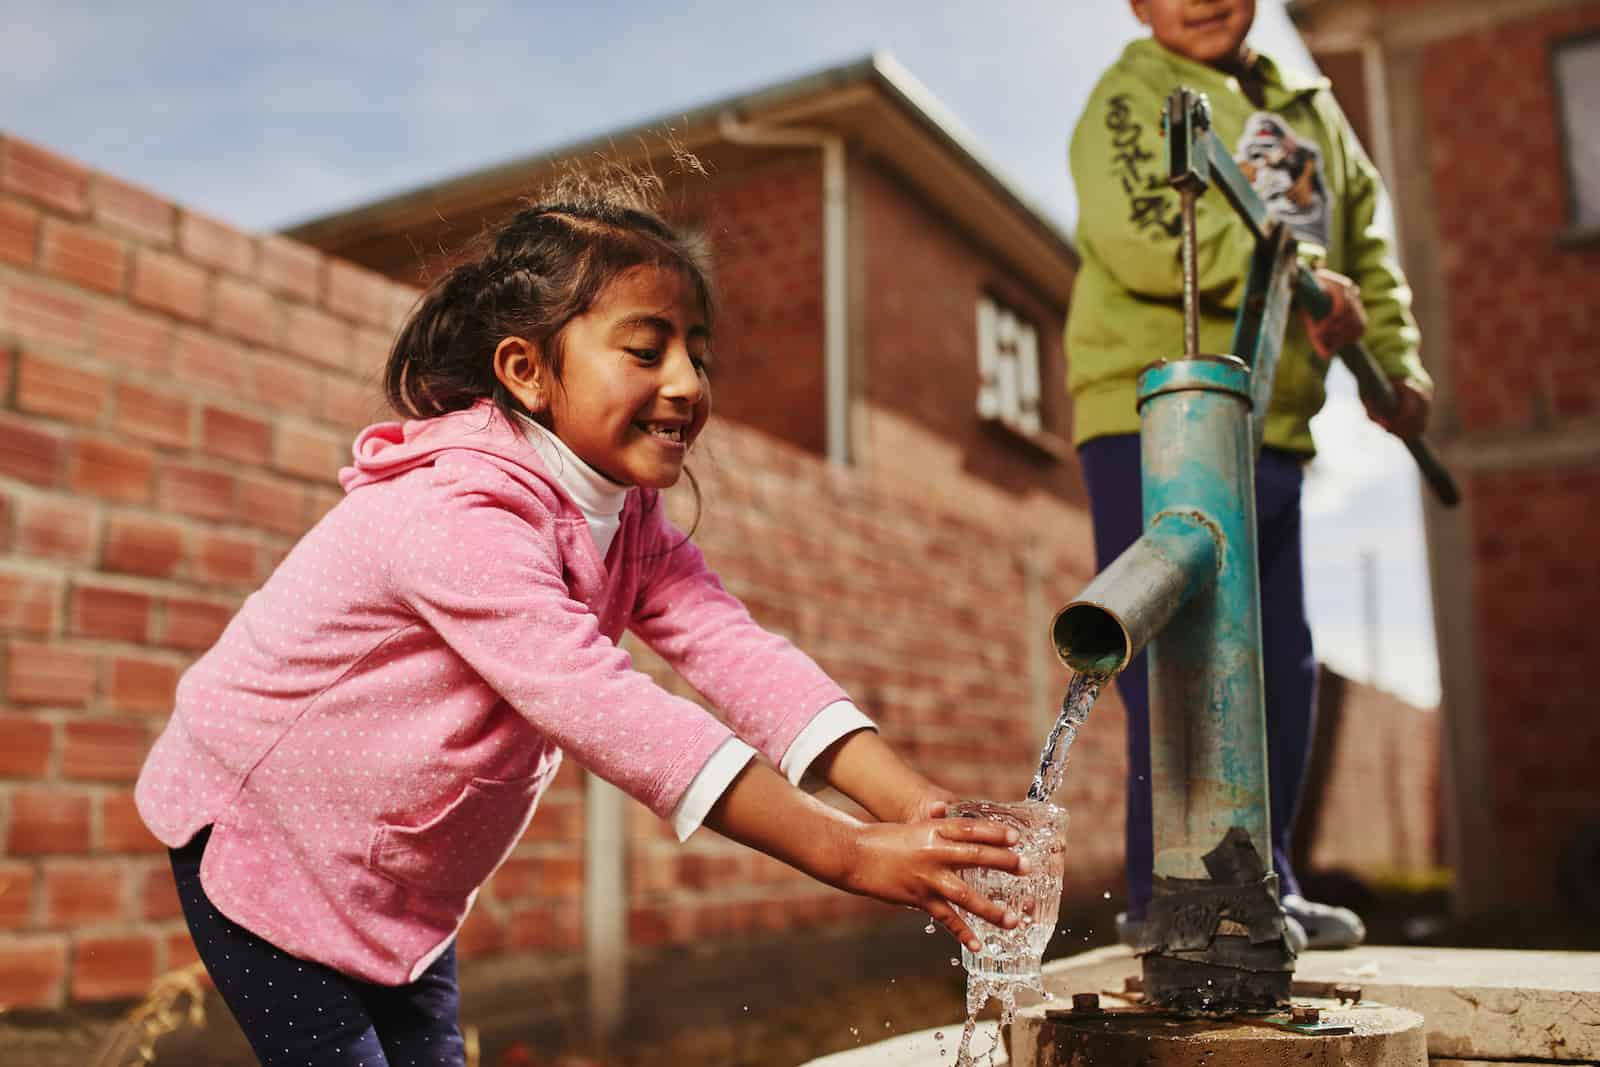 Kids Around the World: A girl gets water from a pump while a boy pumps.